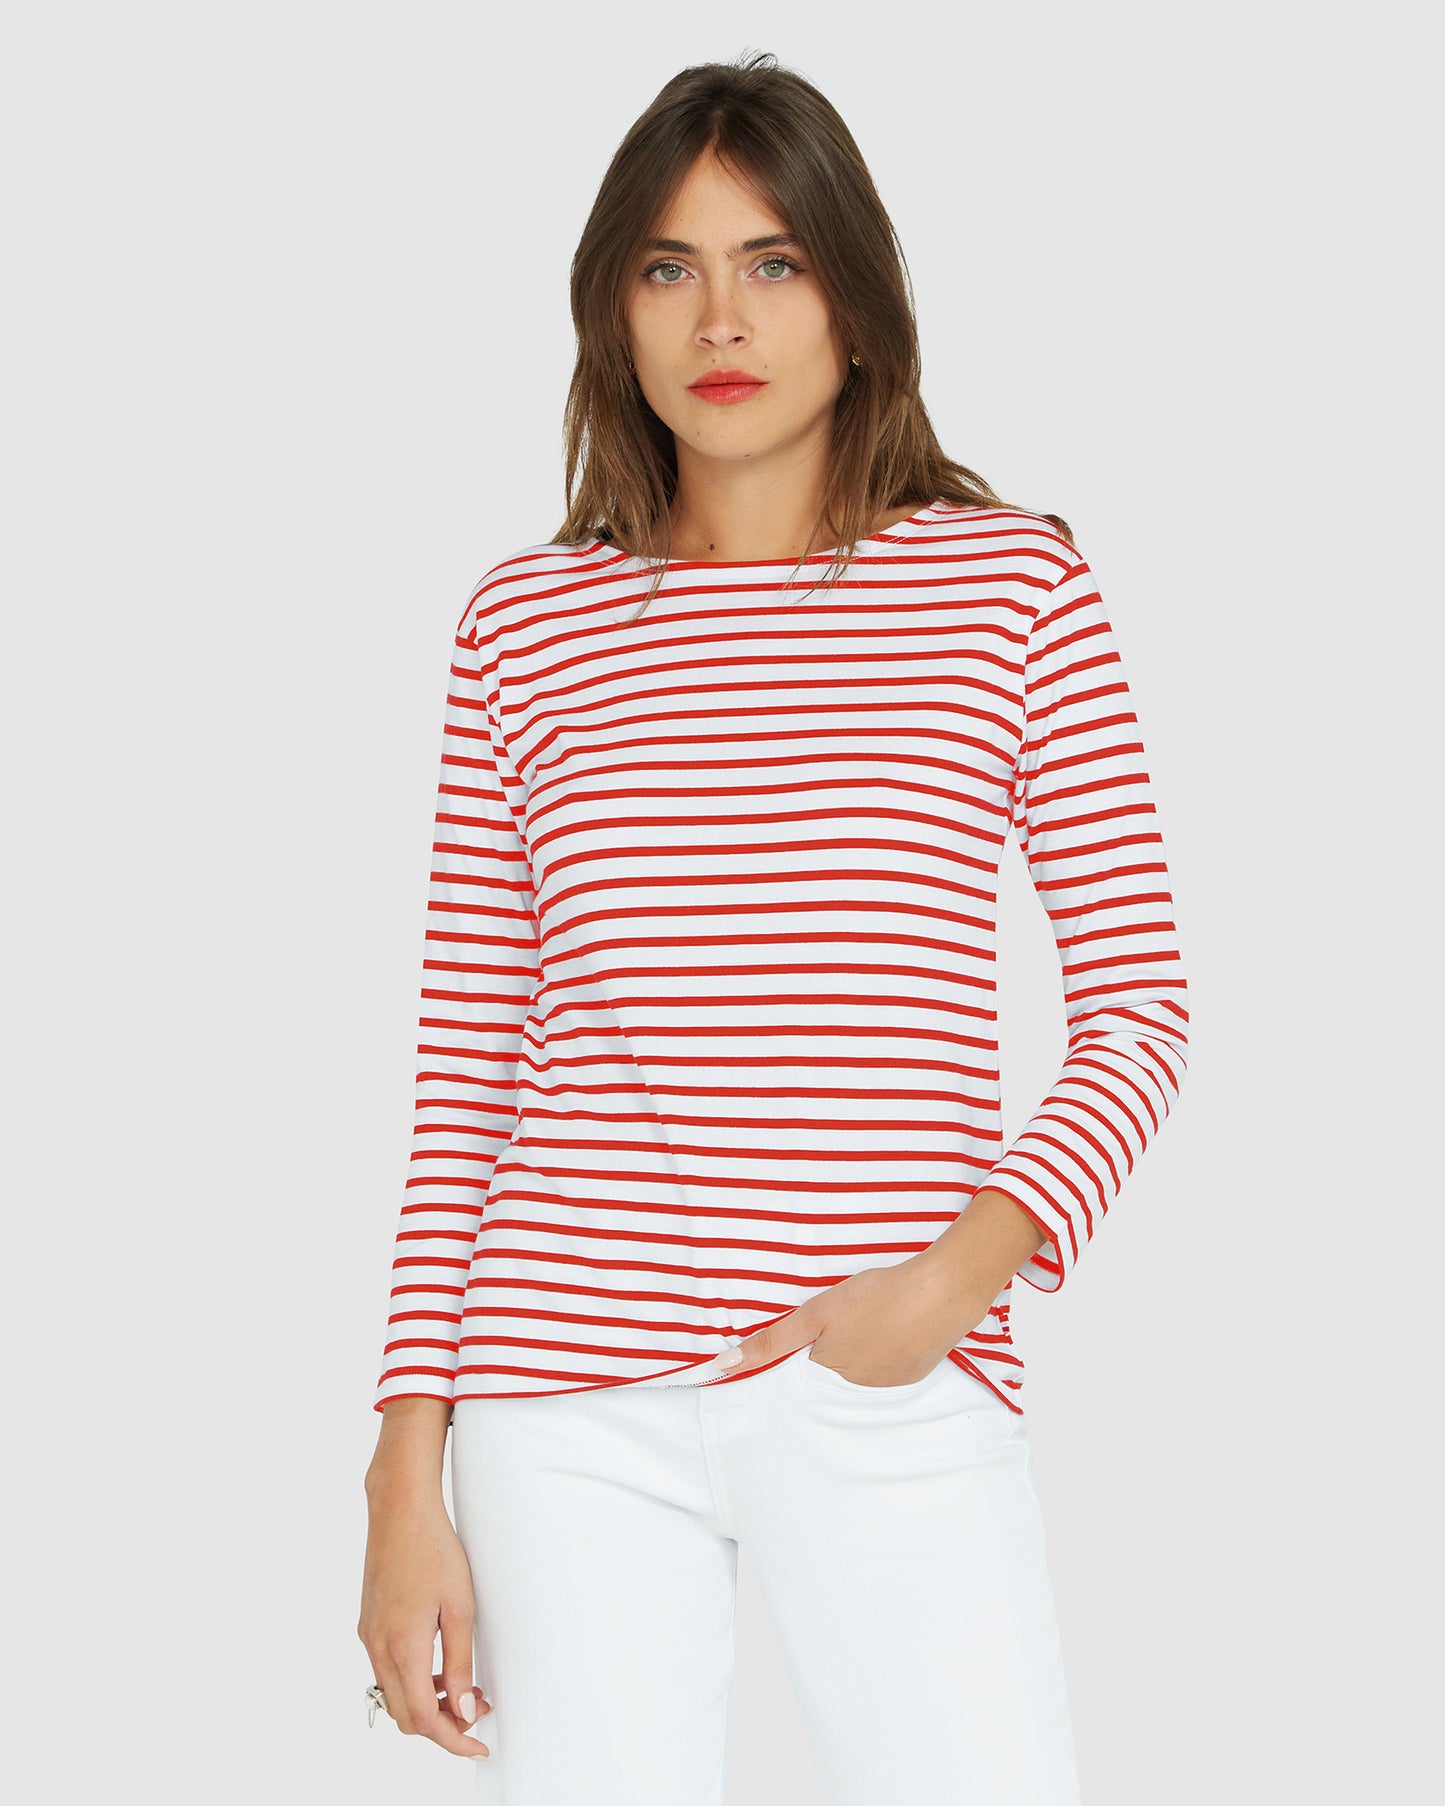 French Breton Boat Neck Top- Red Stripe White Base is